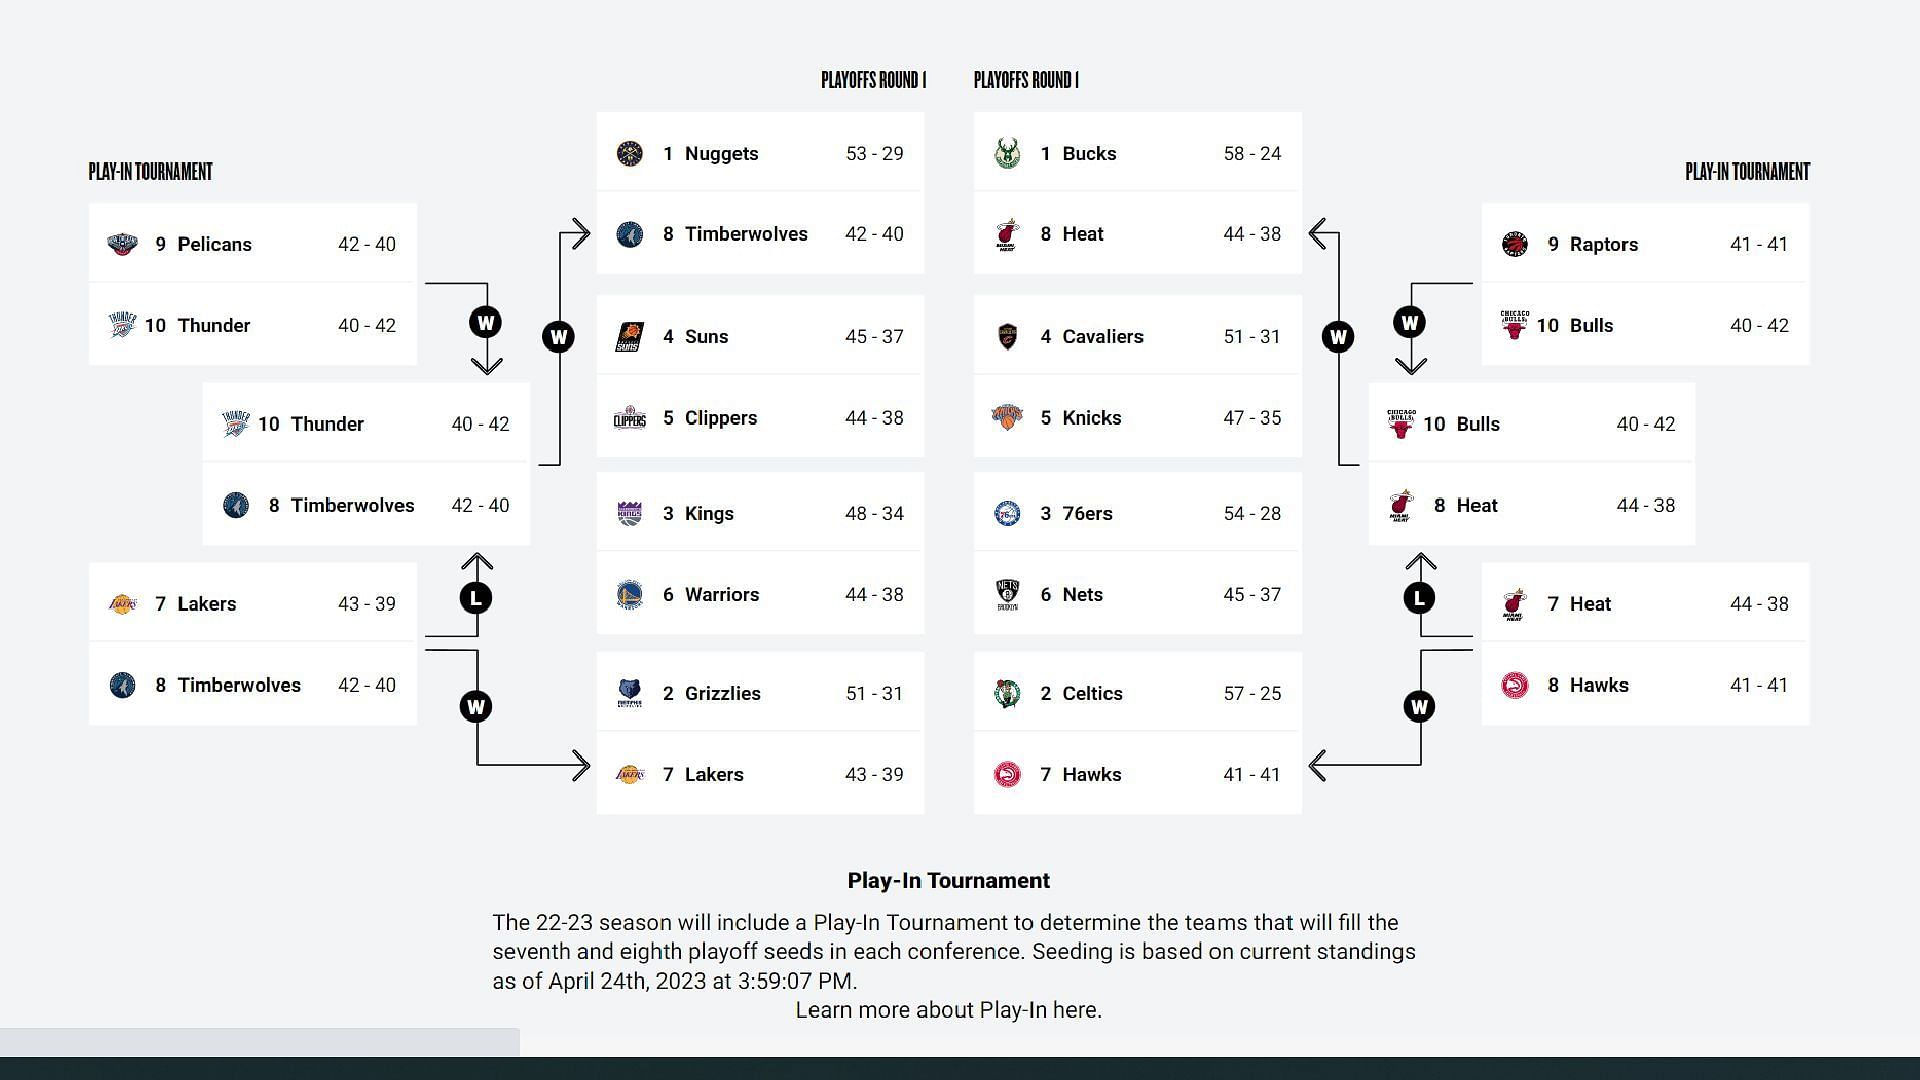 The professional basketball league uses a fixed bracket throughout the playoffs